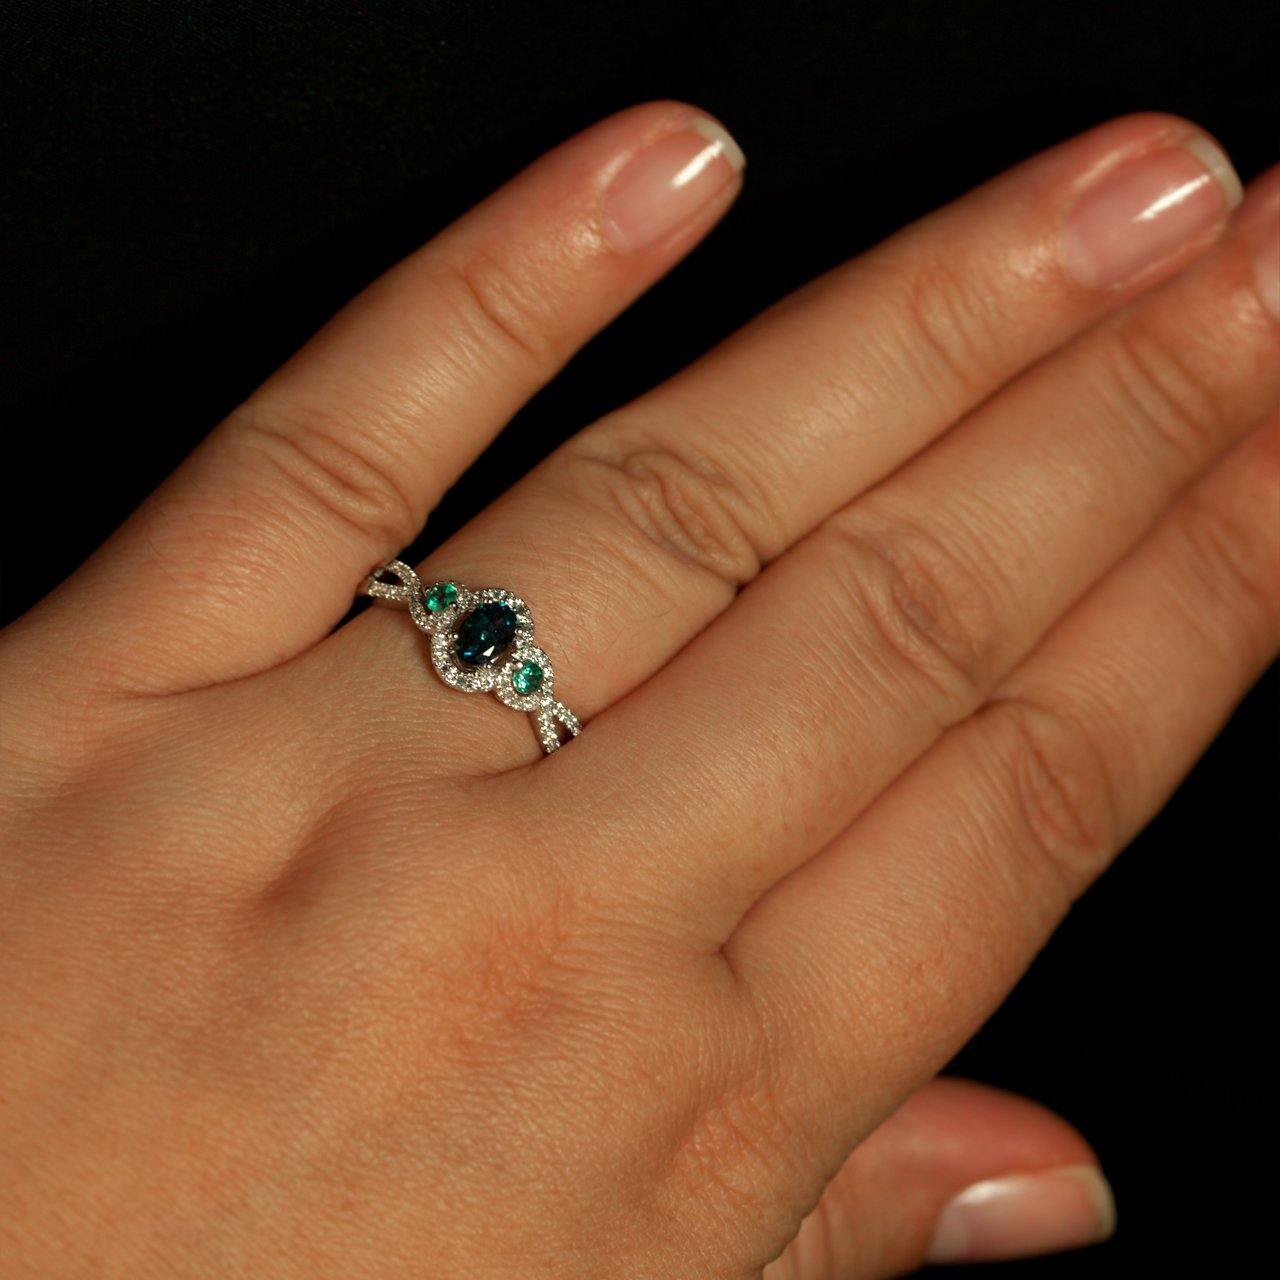 Woman's hand elegantly displaying a 0.42ct natural alexandrite ring in 18k white gold